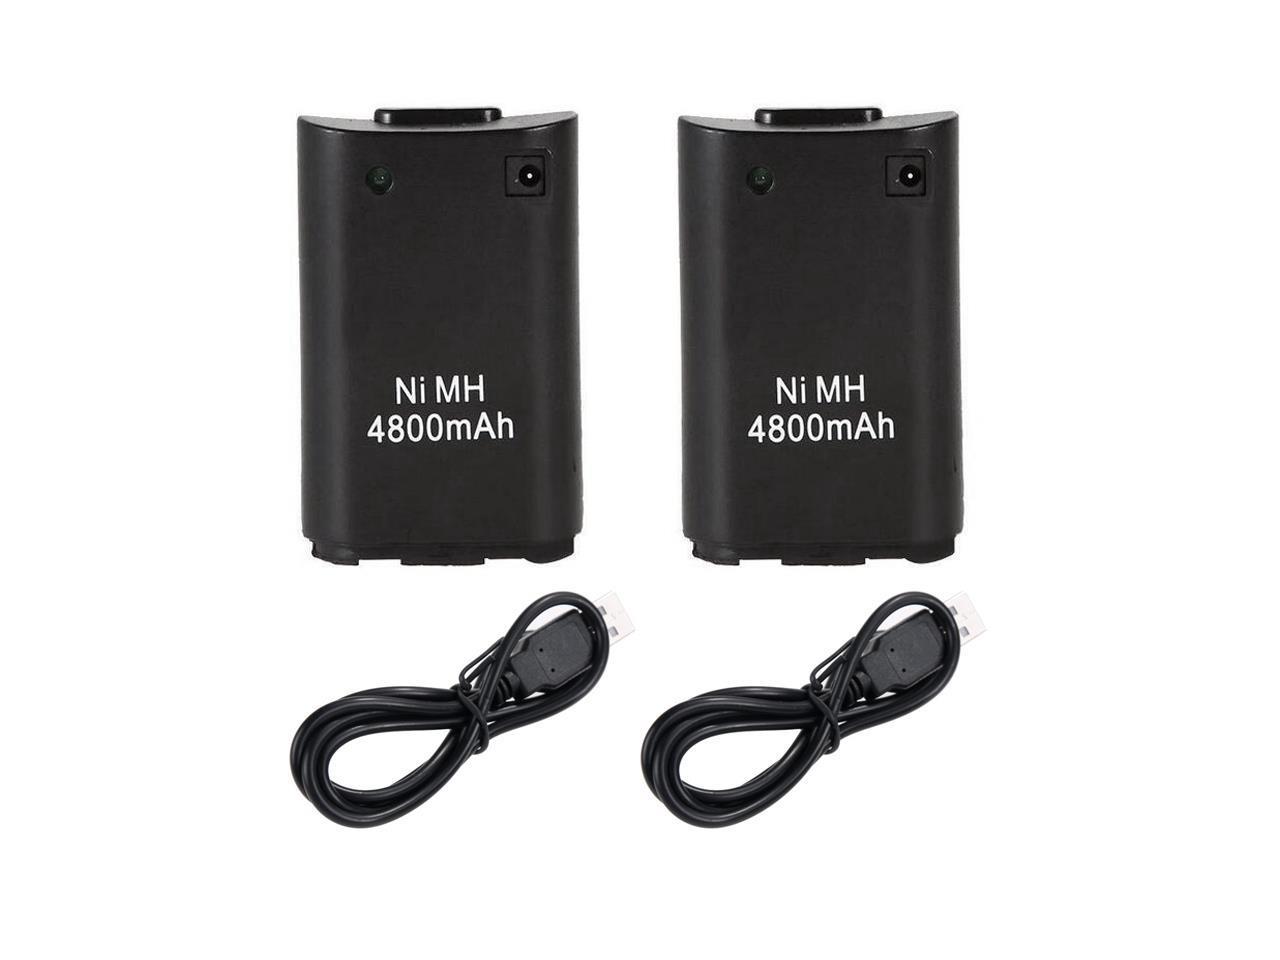 2x 4800mAh Rechargeable Battery Pack for Xbox 360 Wireless Game Controller Gamepads Battery Pack +Charger Cable for Xbox 360